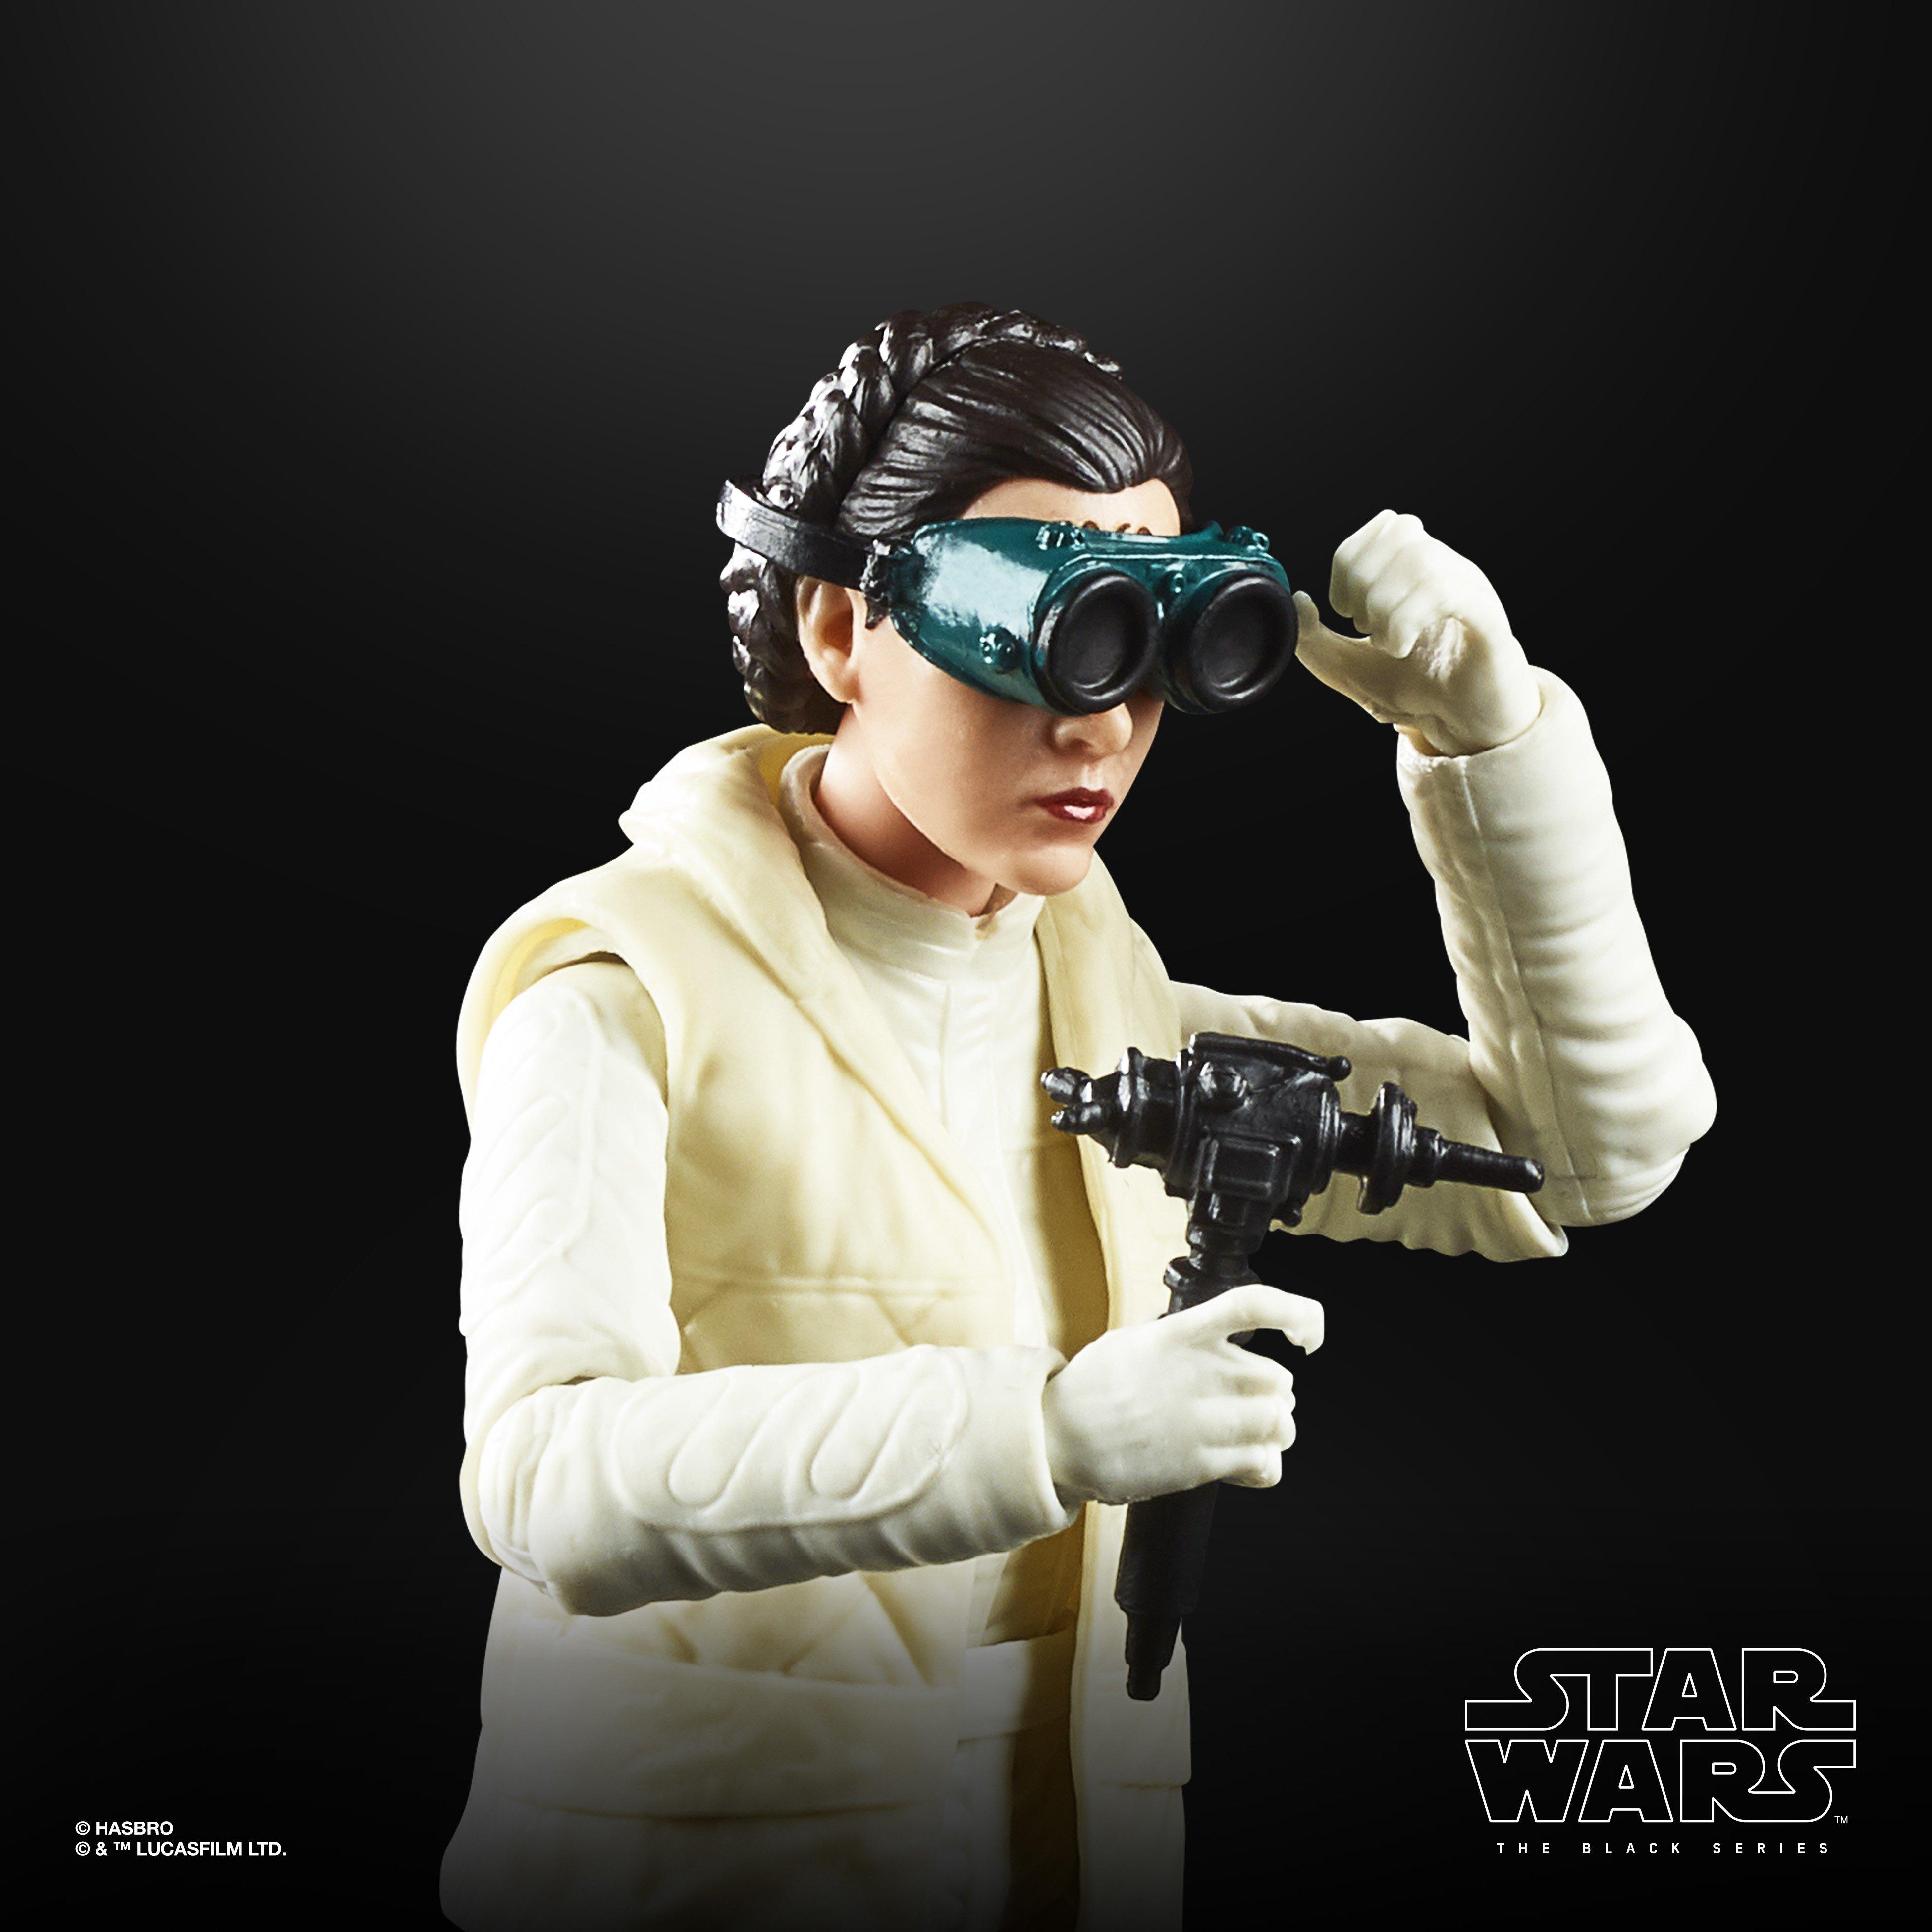 Hasbro Star Wars Episode V: The Empire Strikes Back 40th Anniversary Princess Leia Hoth 6-in Action Figure